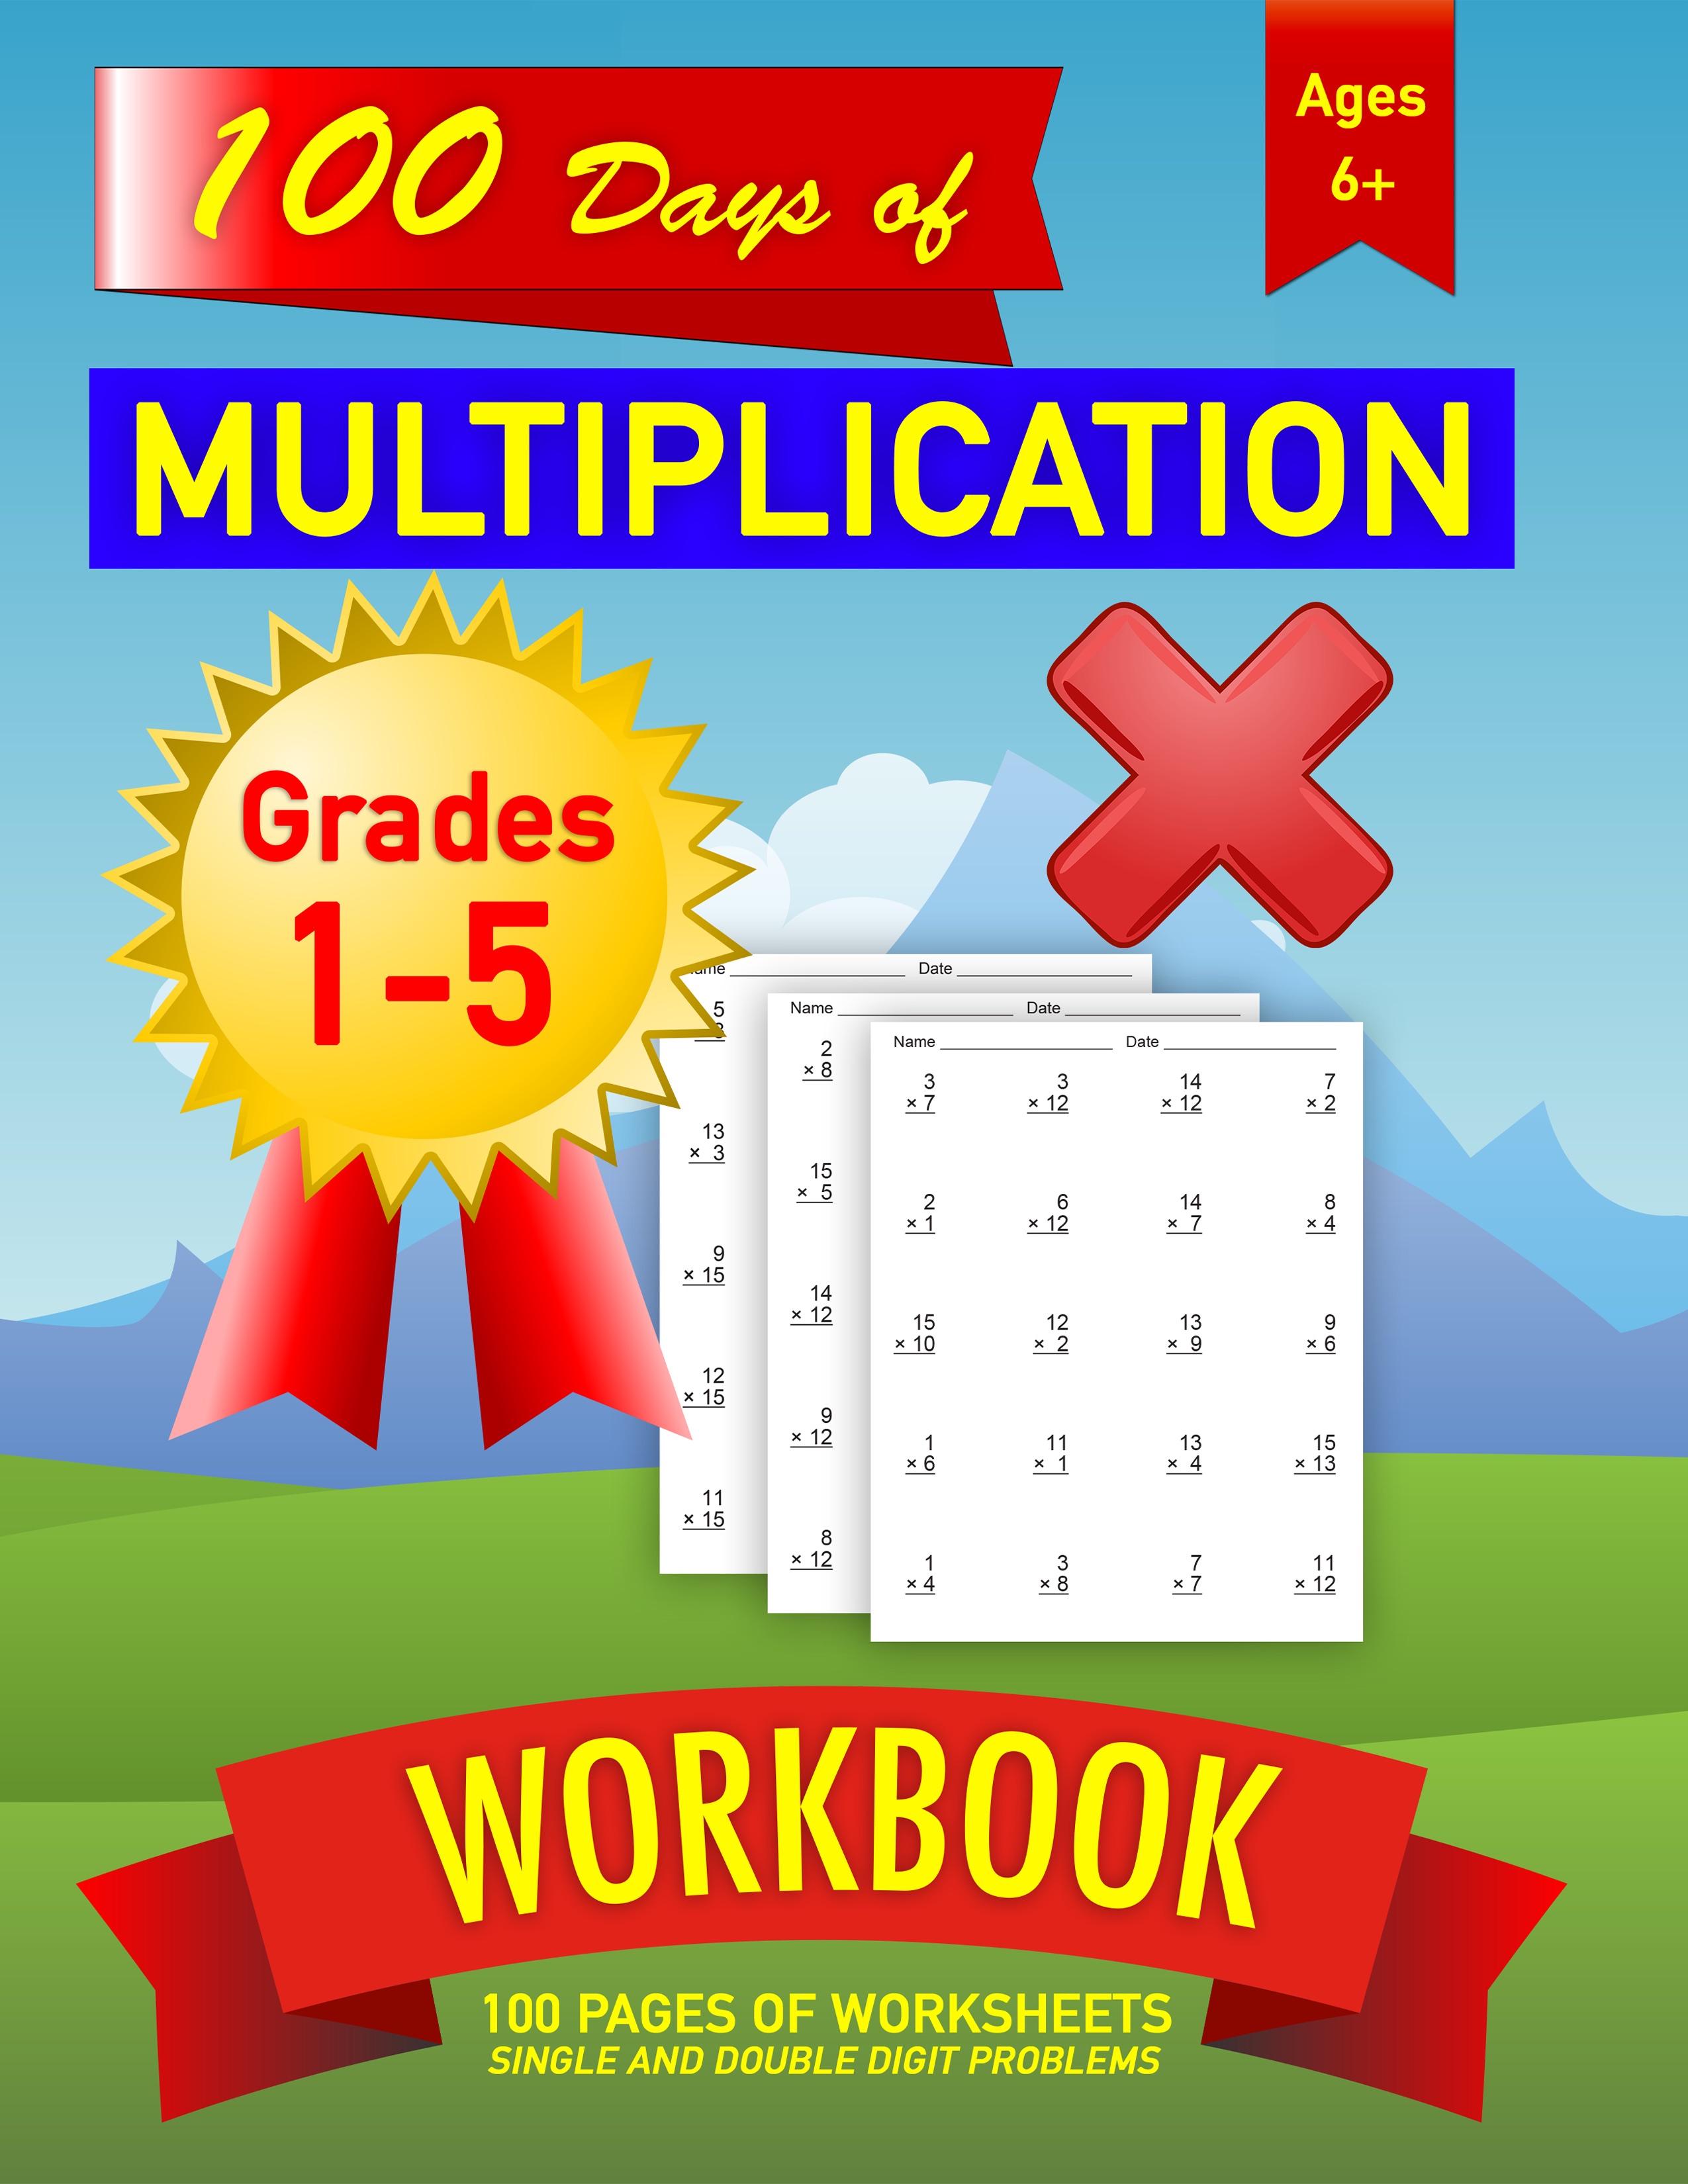 Multiplication Workbook - 100 days of Single and Double Digit Problems - Ages 6+ Grades 1-5: 100 Pages of Practice Worksheets for Students Learning Exercises Multiplication Workbooks